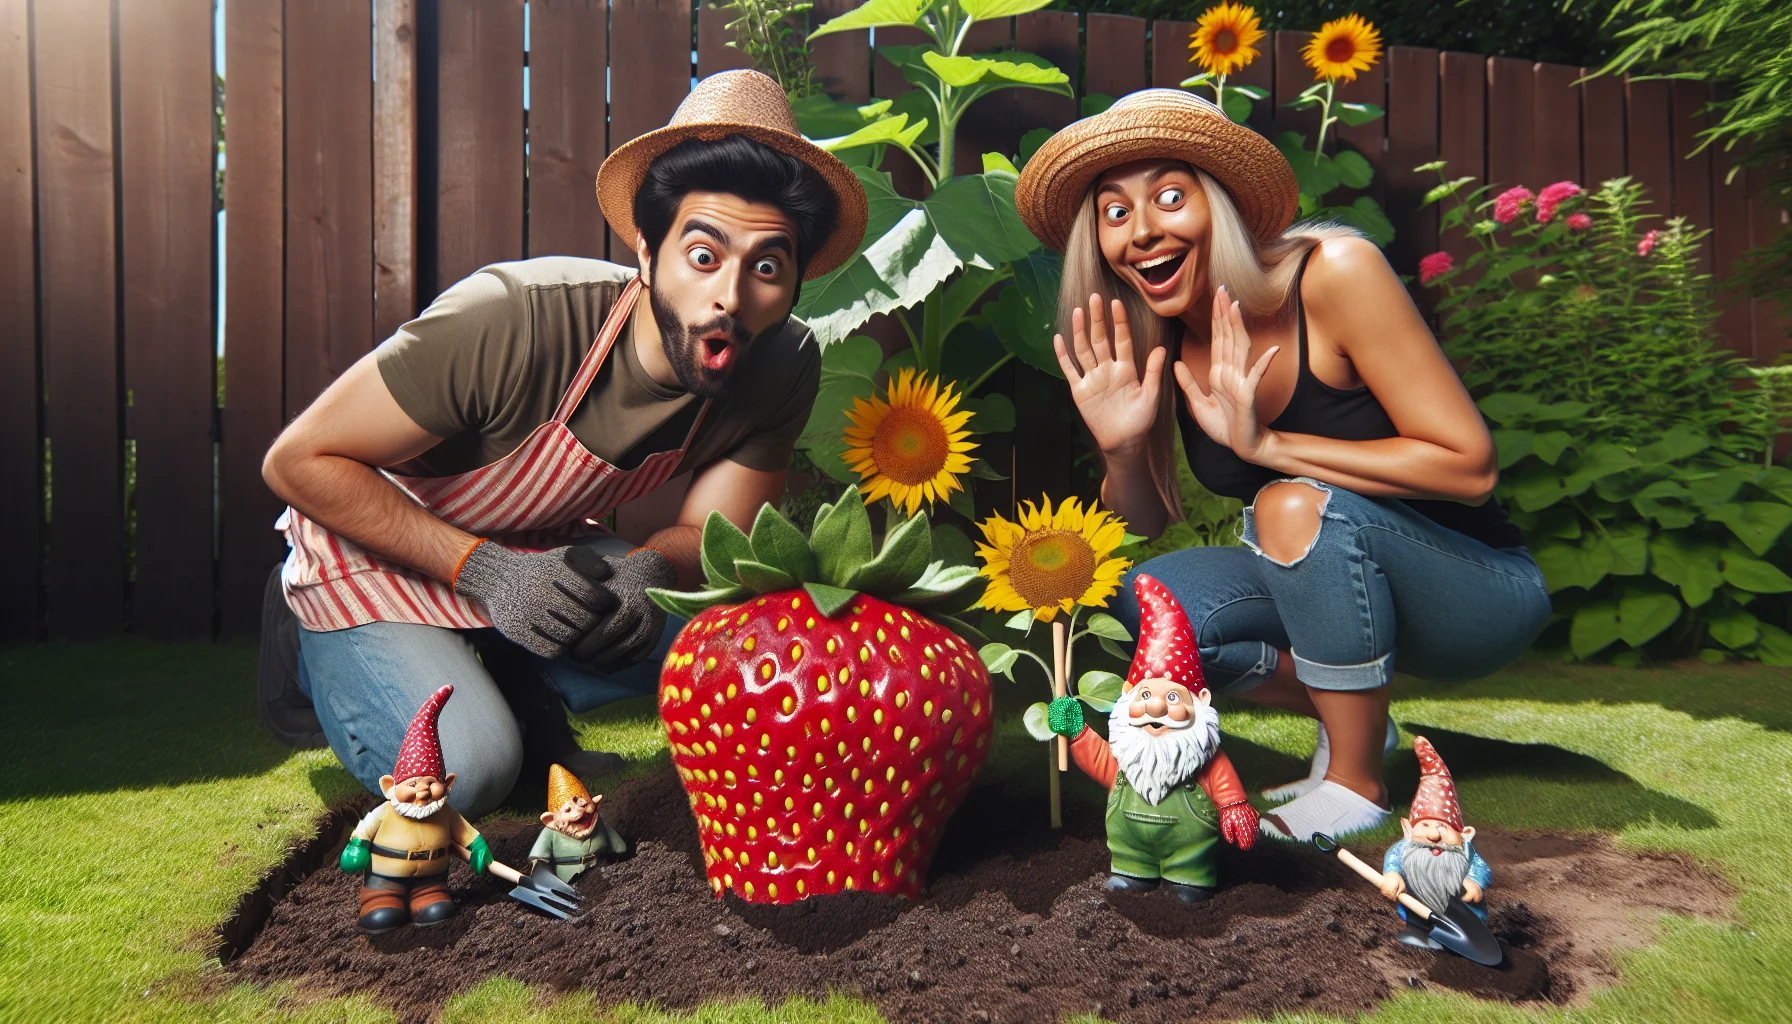 Picture a humorous scene taking place in a sunny and verdant backyard garden where a Middle-Eastern man and a Hispanic woman are involved in a quirky gardening activity. They are both pleasantly surprised to discover oversized fruits growing in peculiar ways. One fruit, a giant strawberry, is seen peeking out from behind a garden gnome, as if it's shy. Another, a huge pineapple, is sprouting from a sunflower stem, defying all logic. The man and woman are wearing typical gardening gear: gloves, hats, casual clothes splattered with soil, and their faces express joyful astonishment at their secret, fantastical harvest.